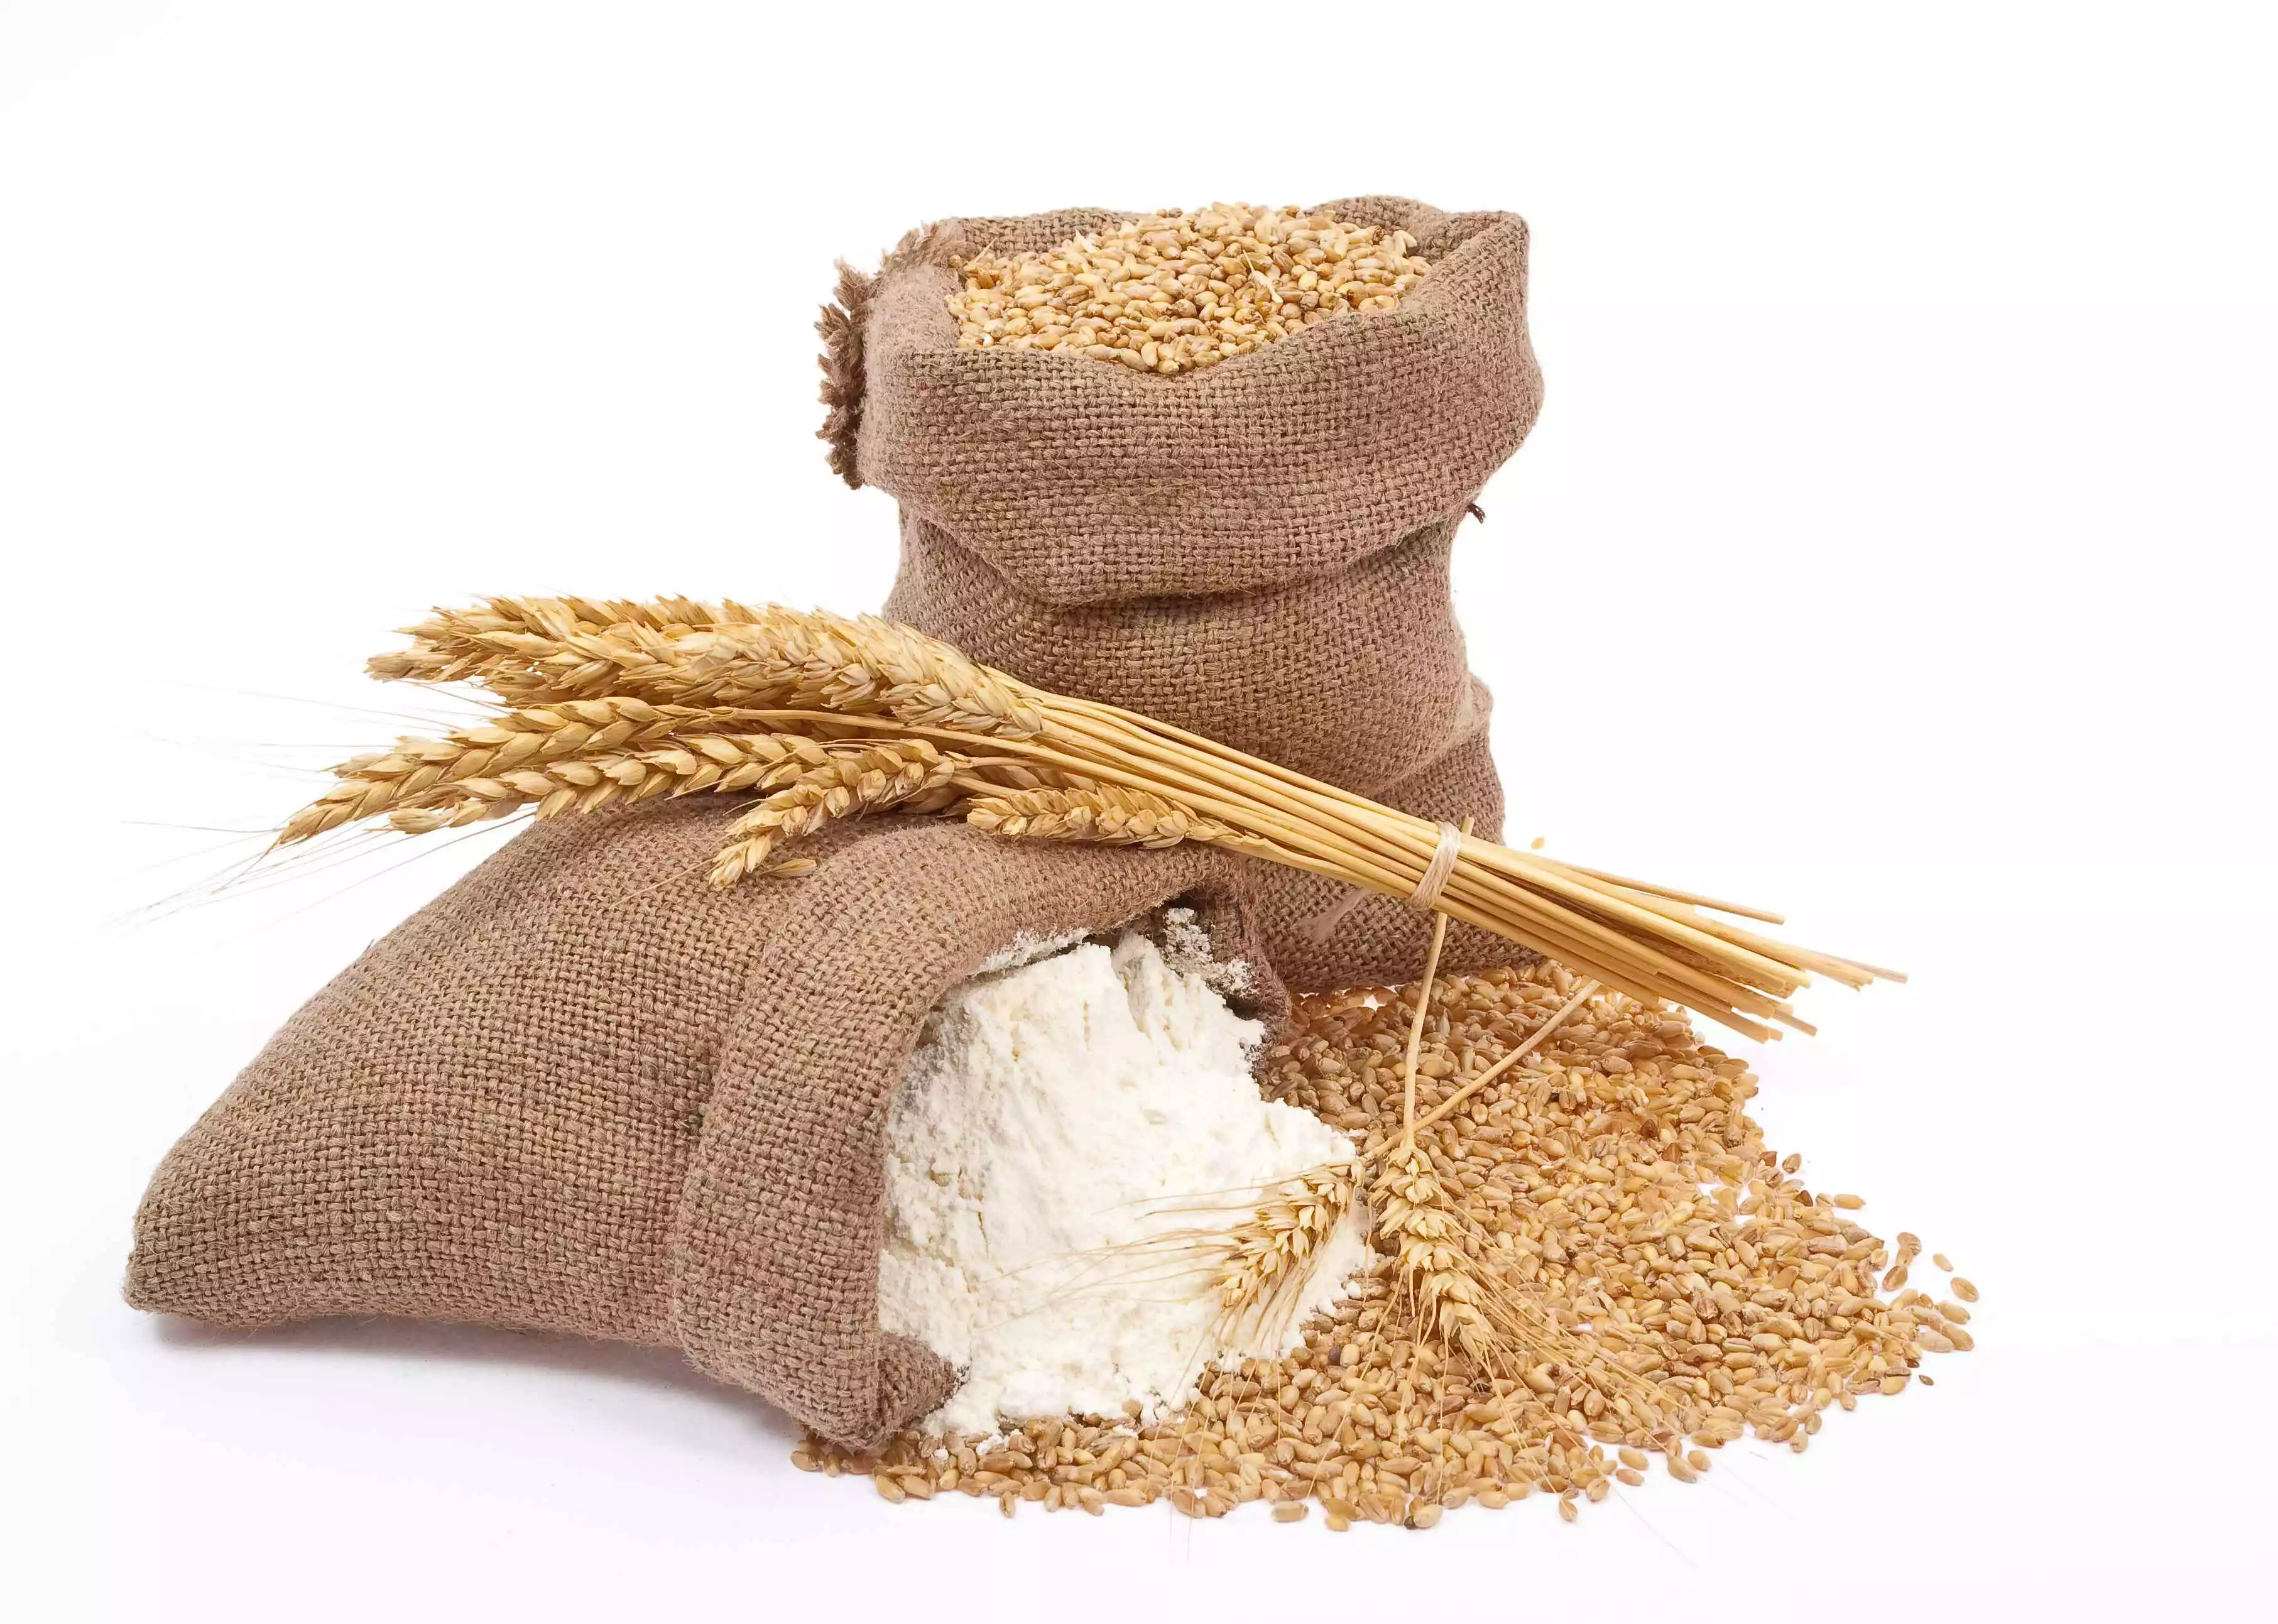 Flour and wheat can be shipped with bulk delivery